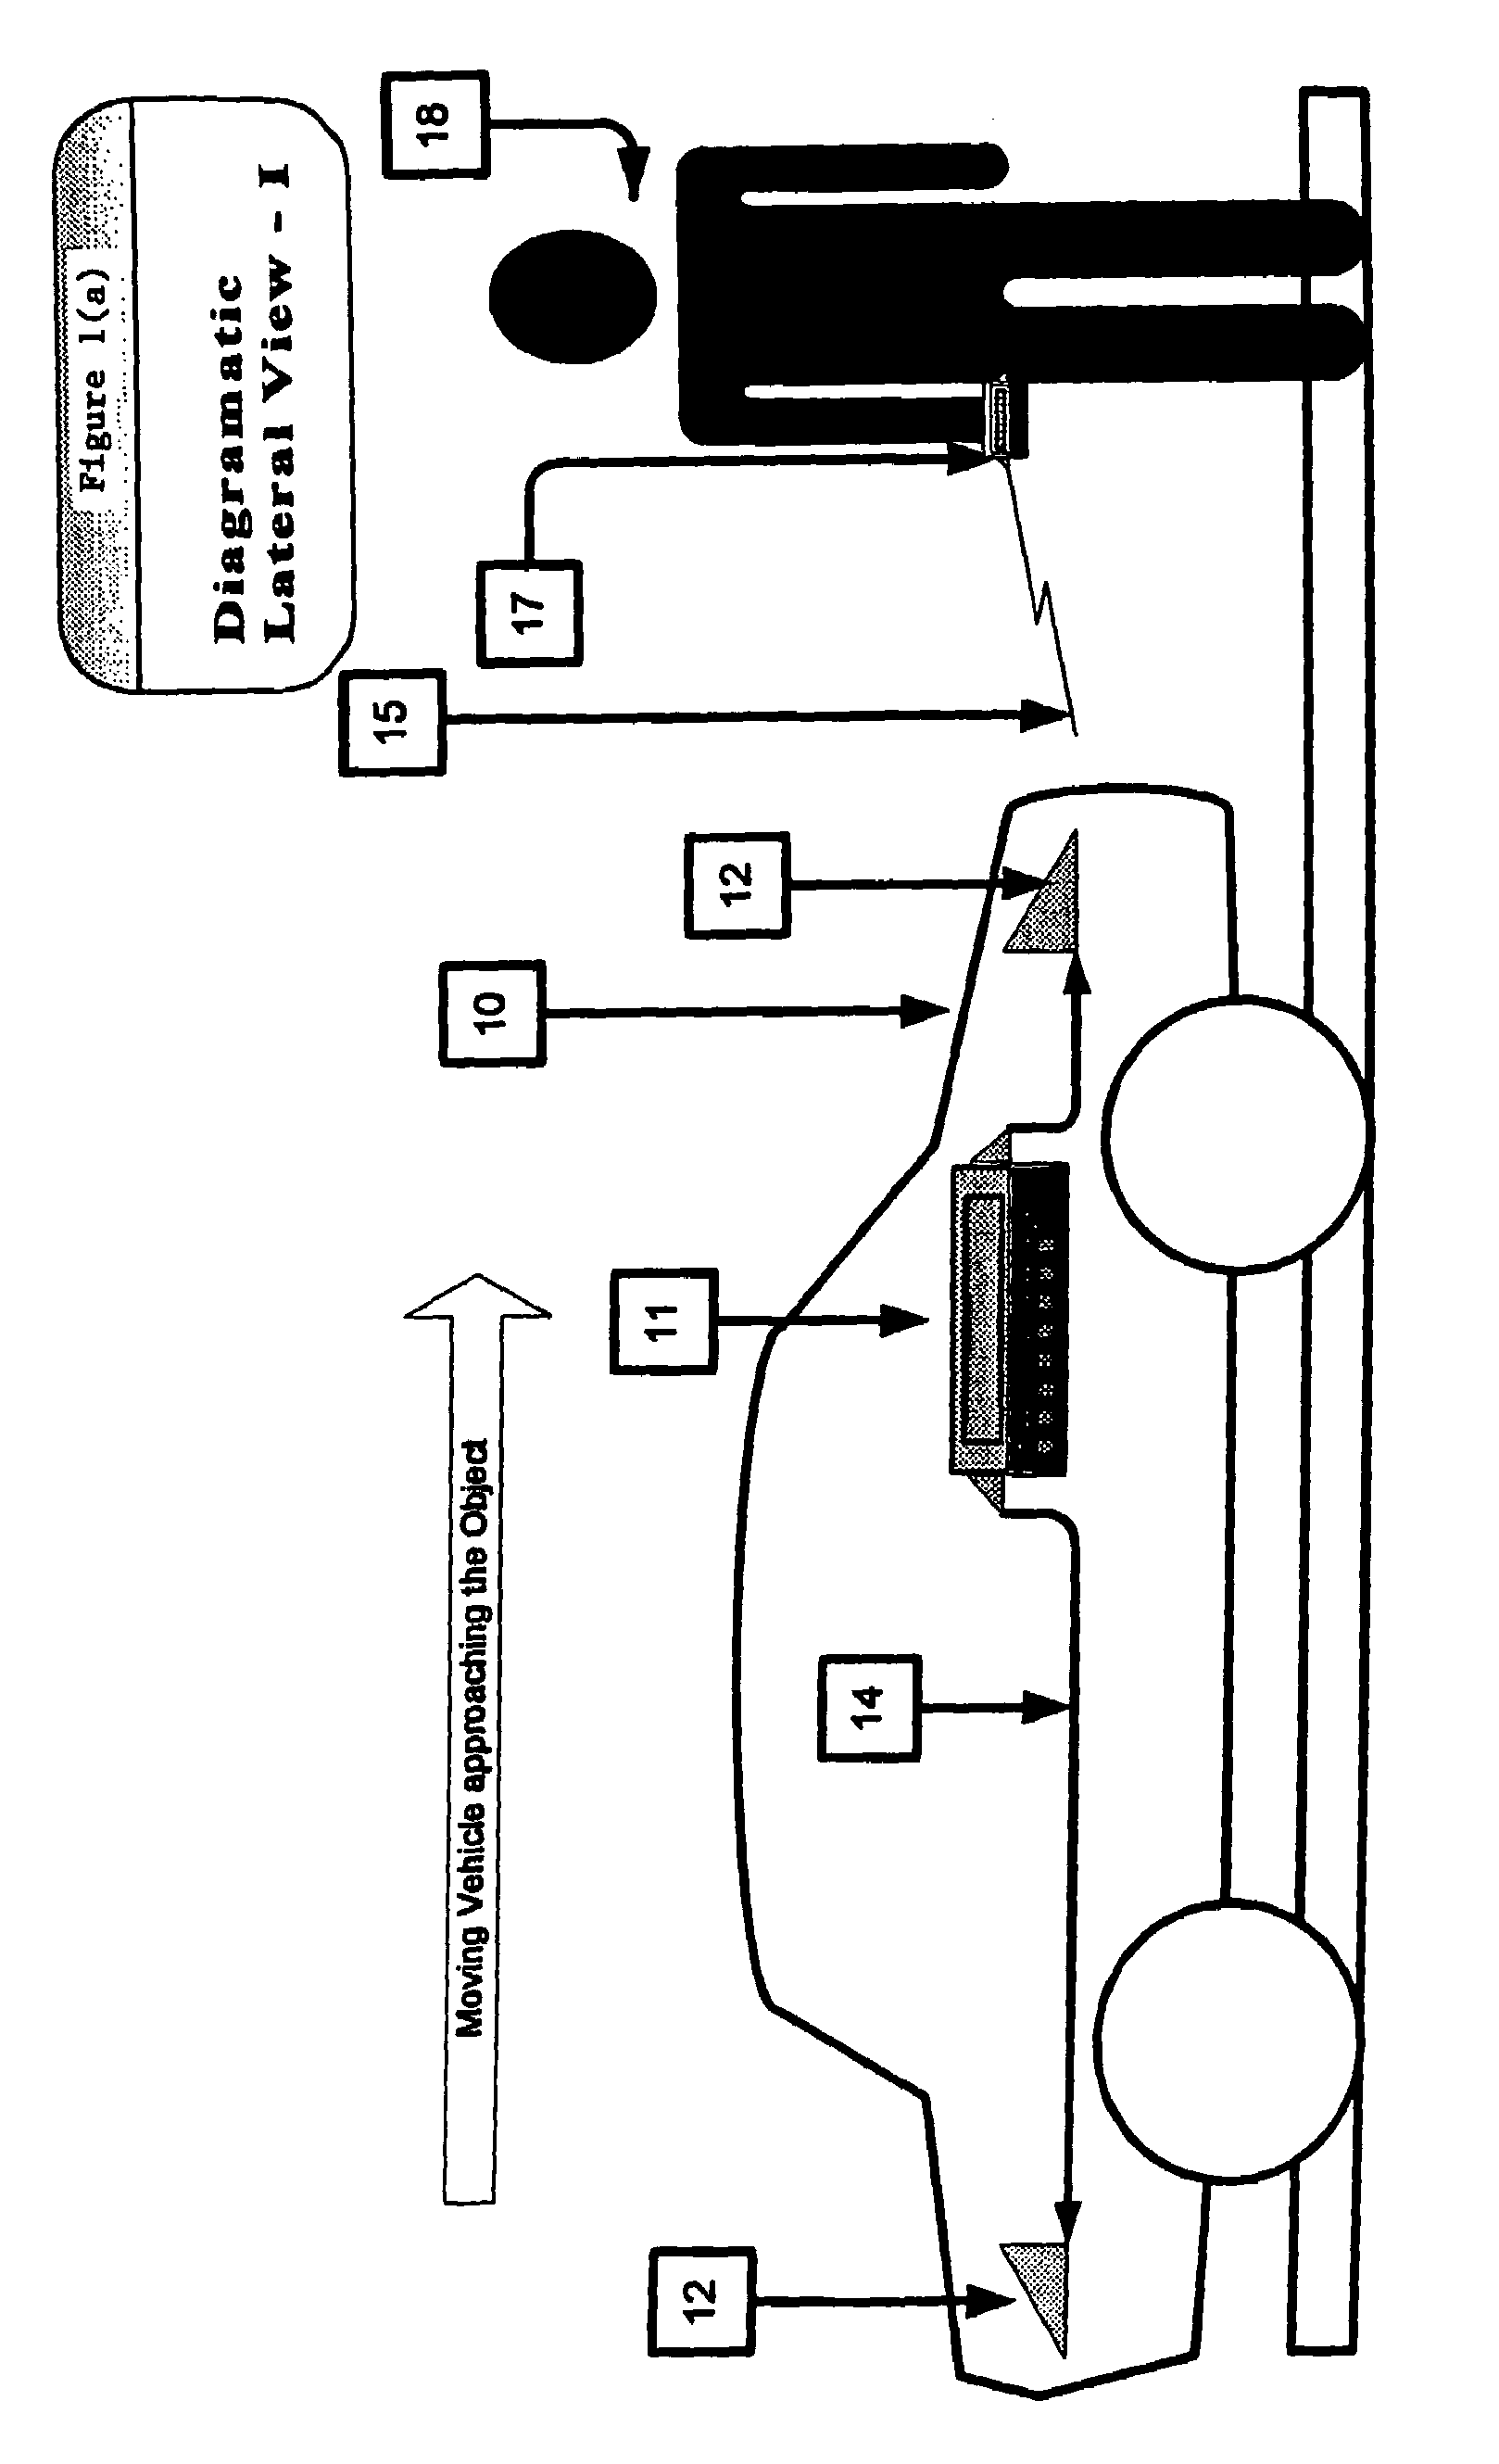 Imminent collision warning system and method